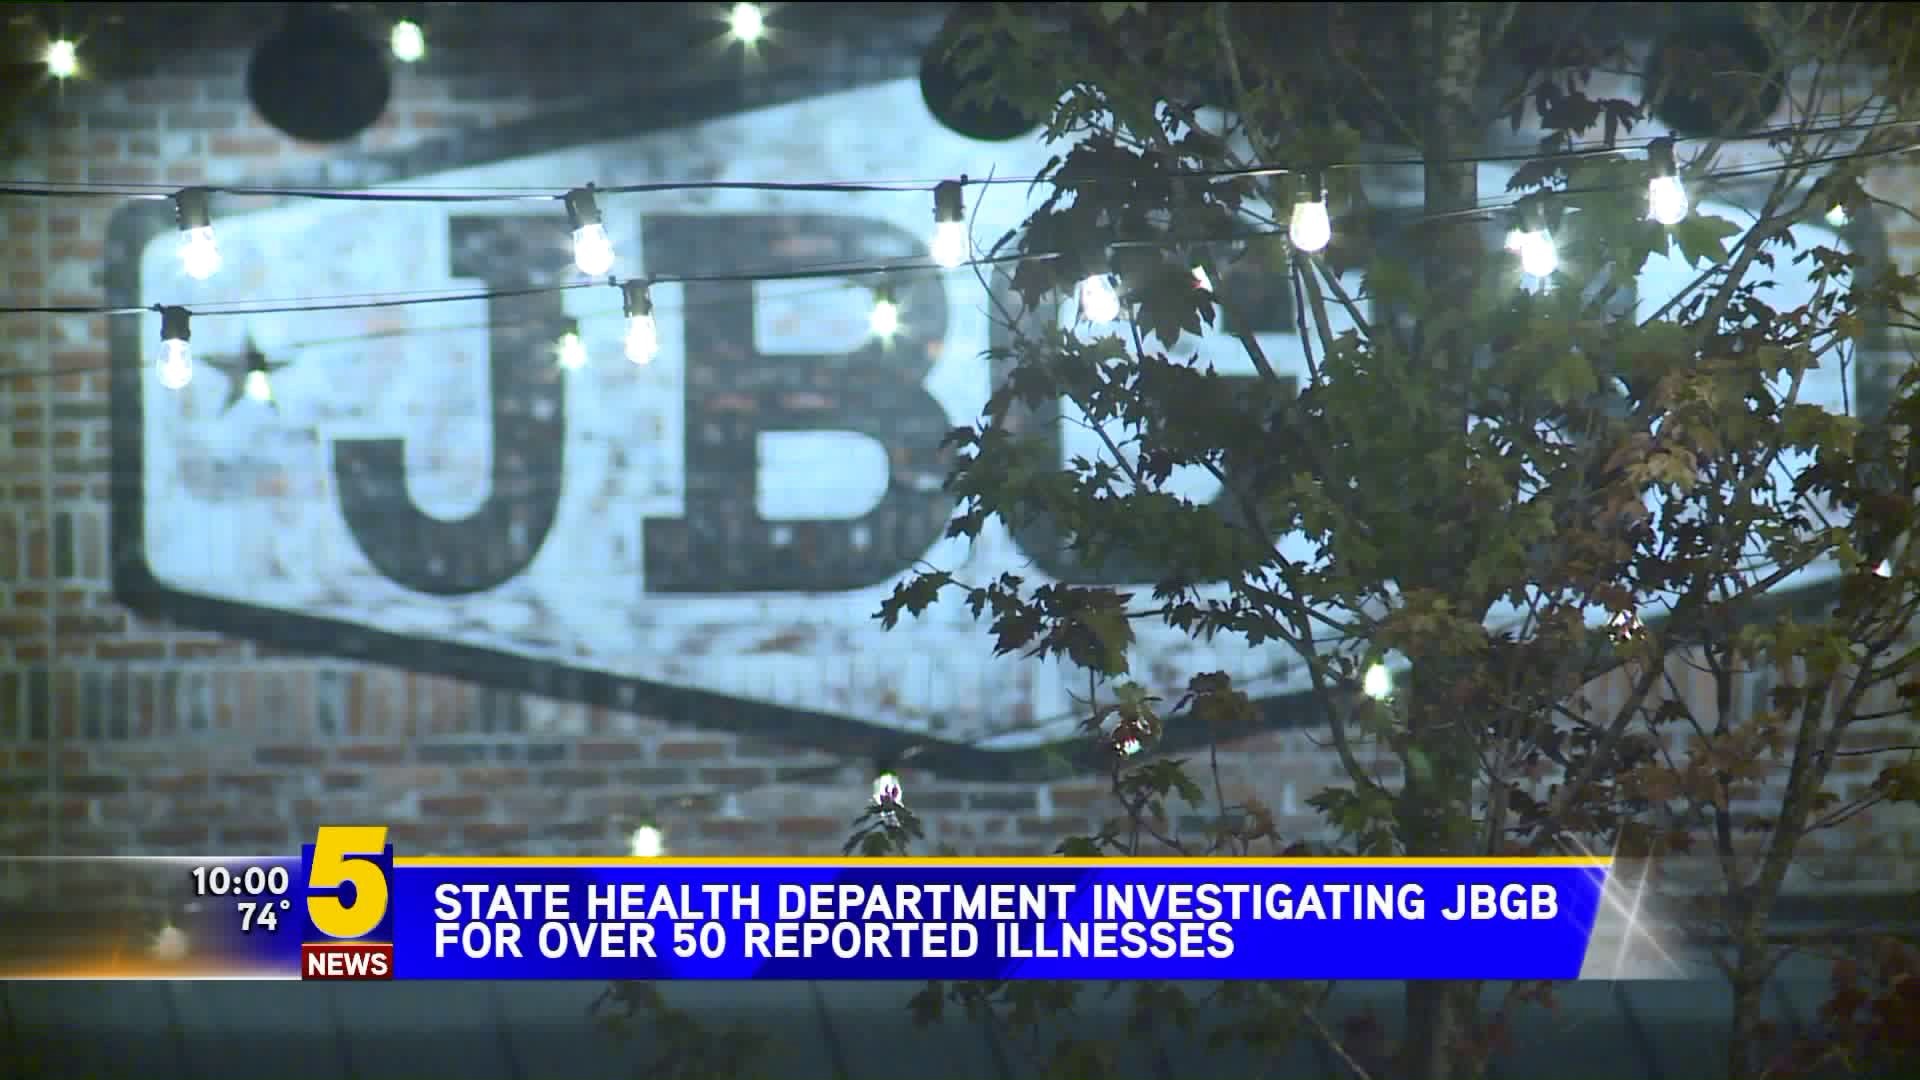 State Health Department Investigatin JBGB For Over 50 Reported Illnesses